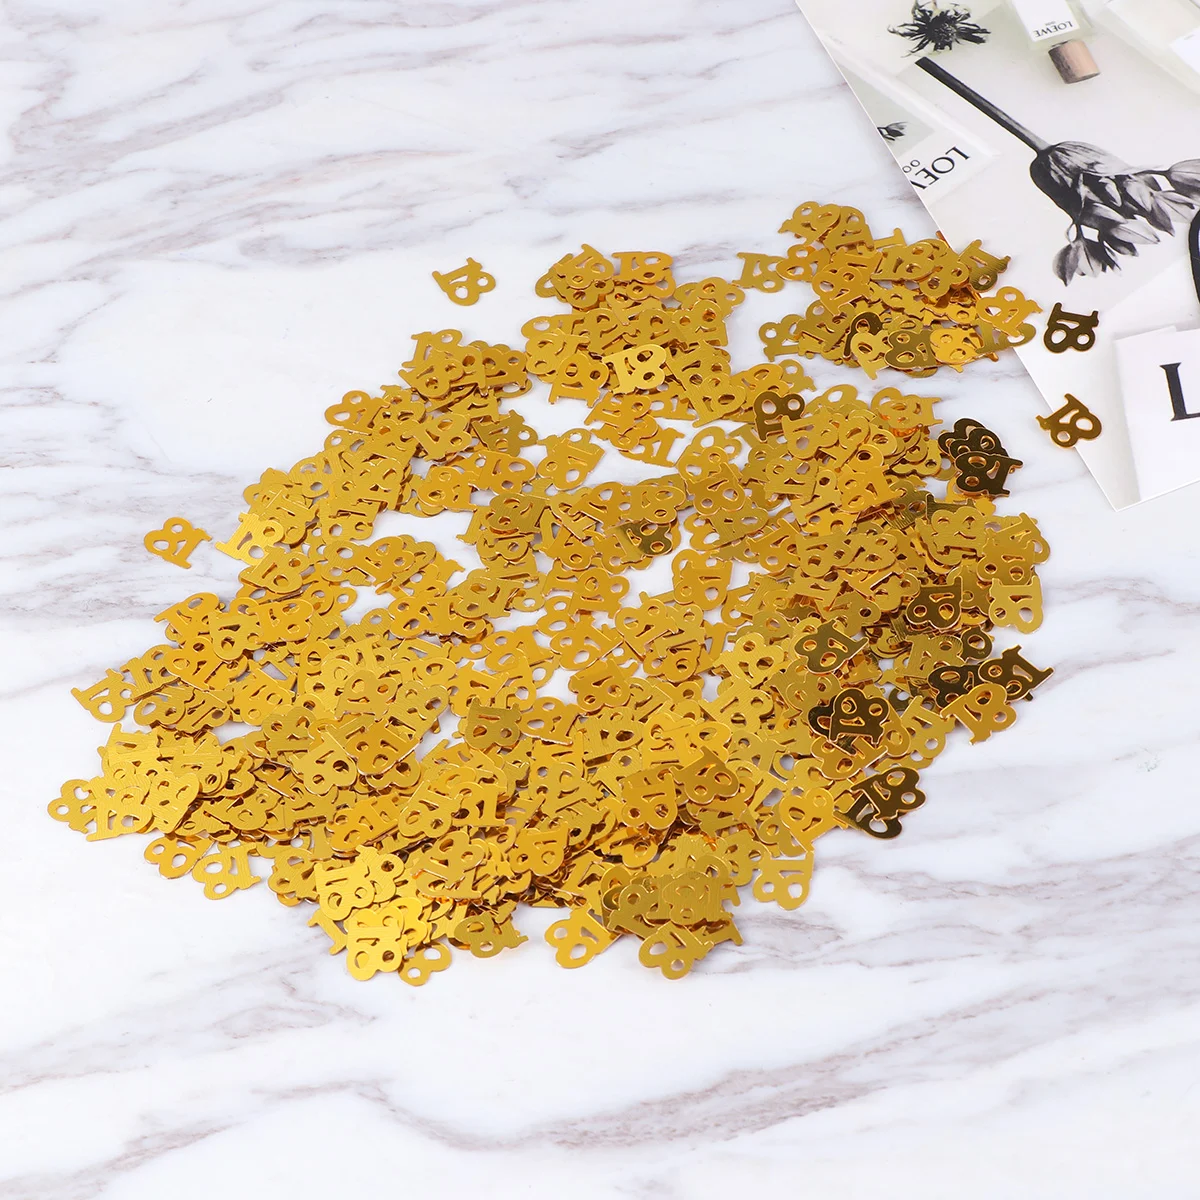 

600PC Monochrome Digital Birthday Confetti Party Happy Throwing Sequins Age 18 for Festival Party Decoration (Golden)